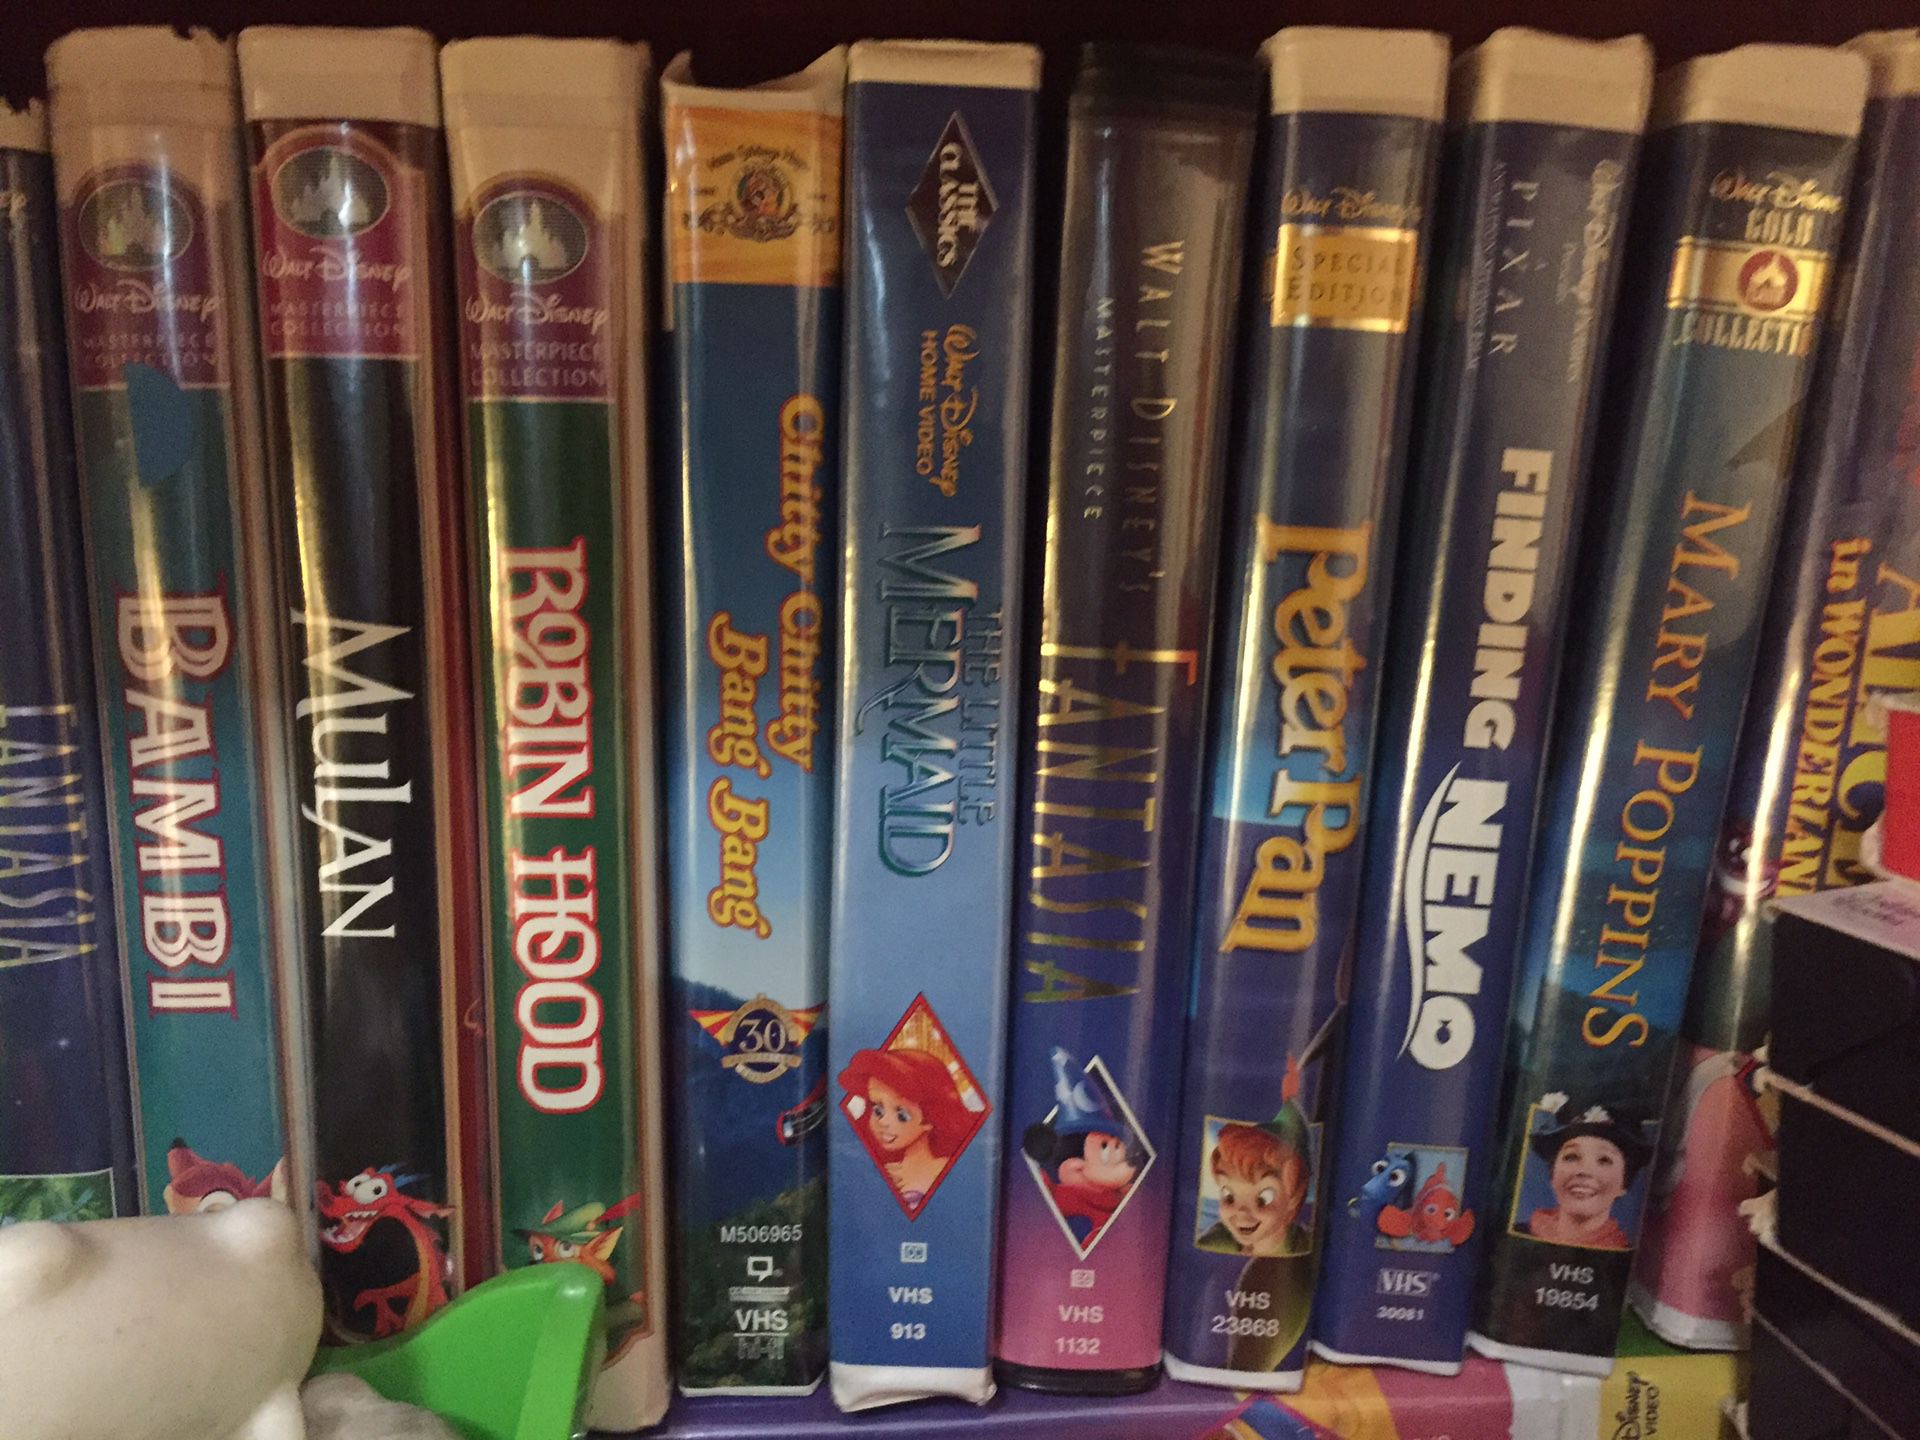 VHS $1 and dvd $2 sale